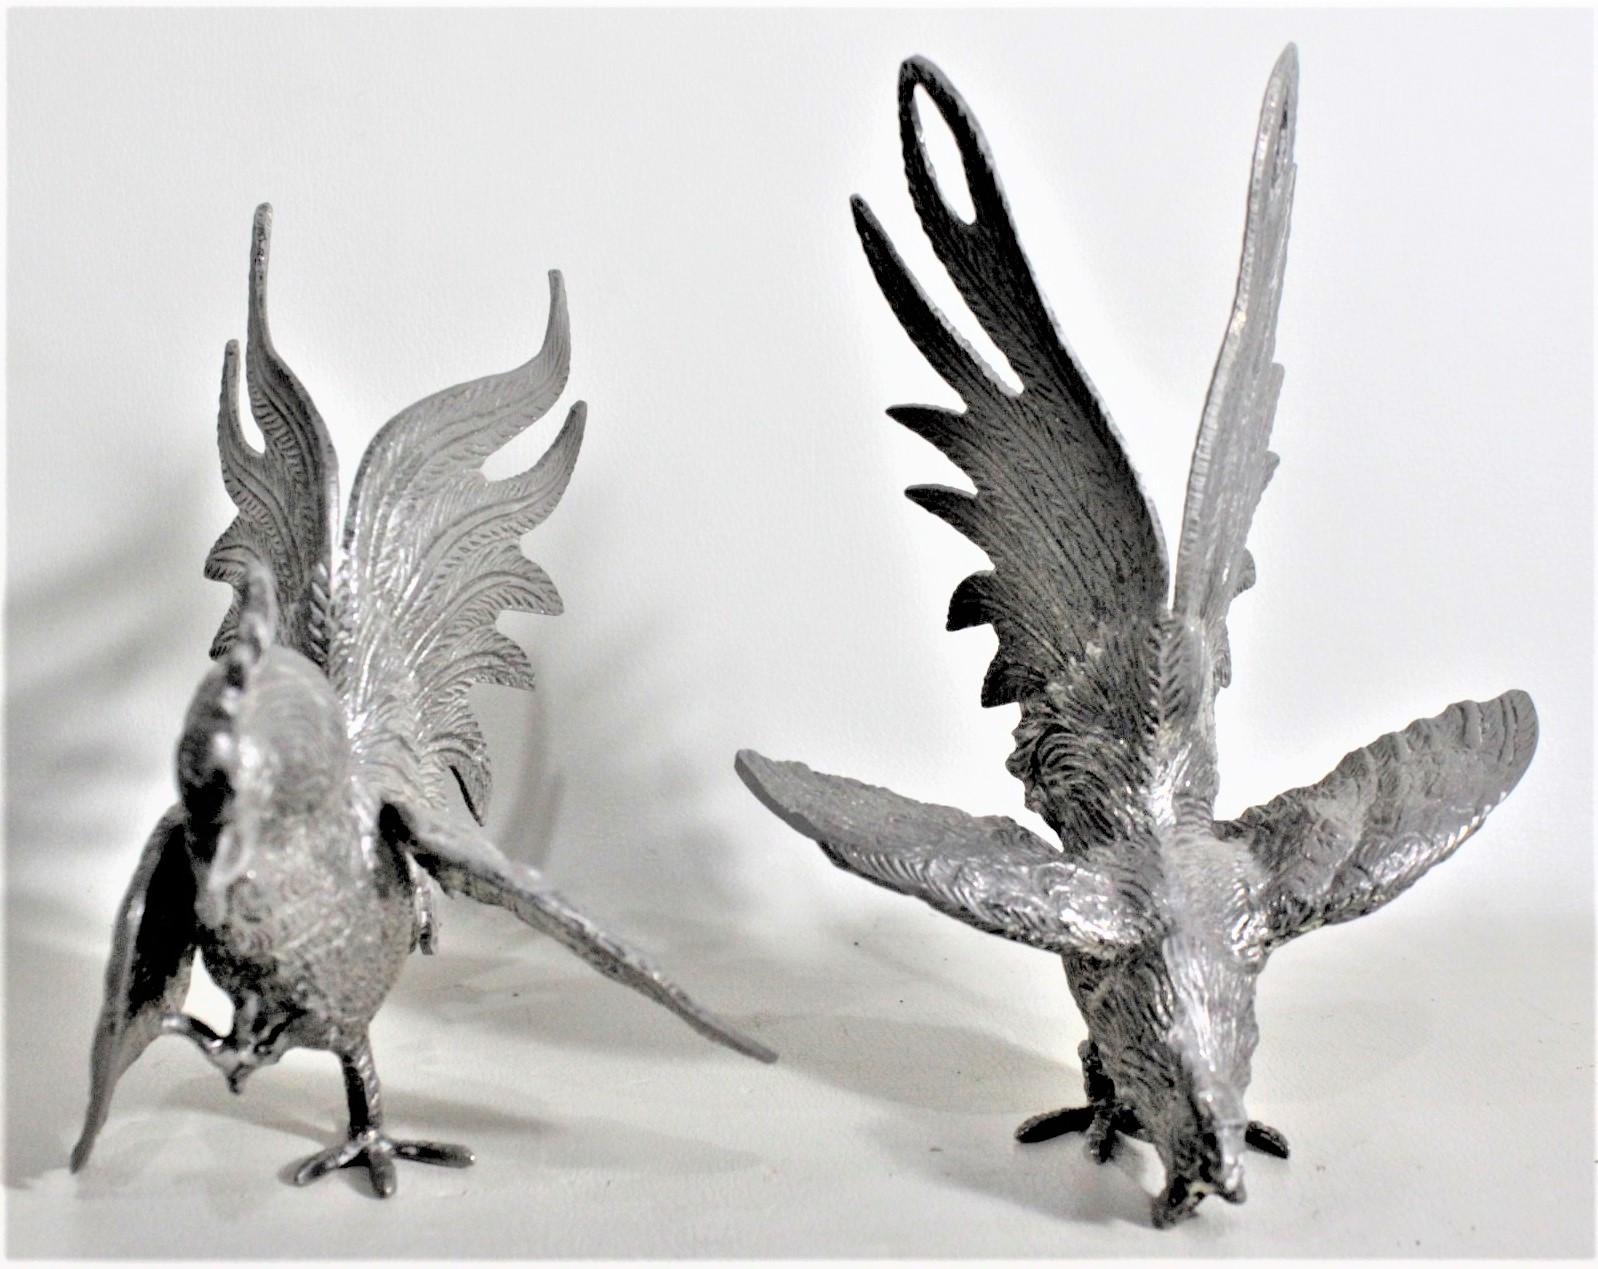 Cast Pair of Ornate Silver Plated Fighting Rooster or Cockerel Table Sculptures For Sale